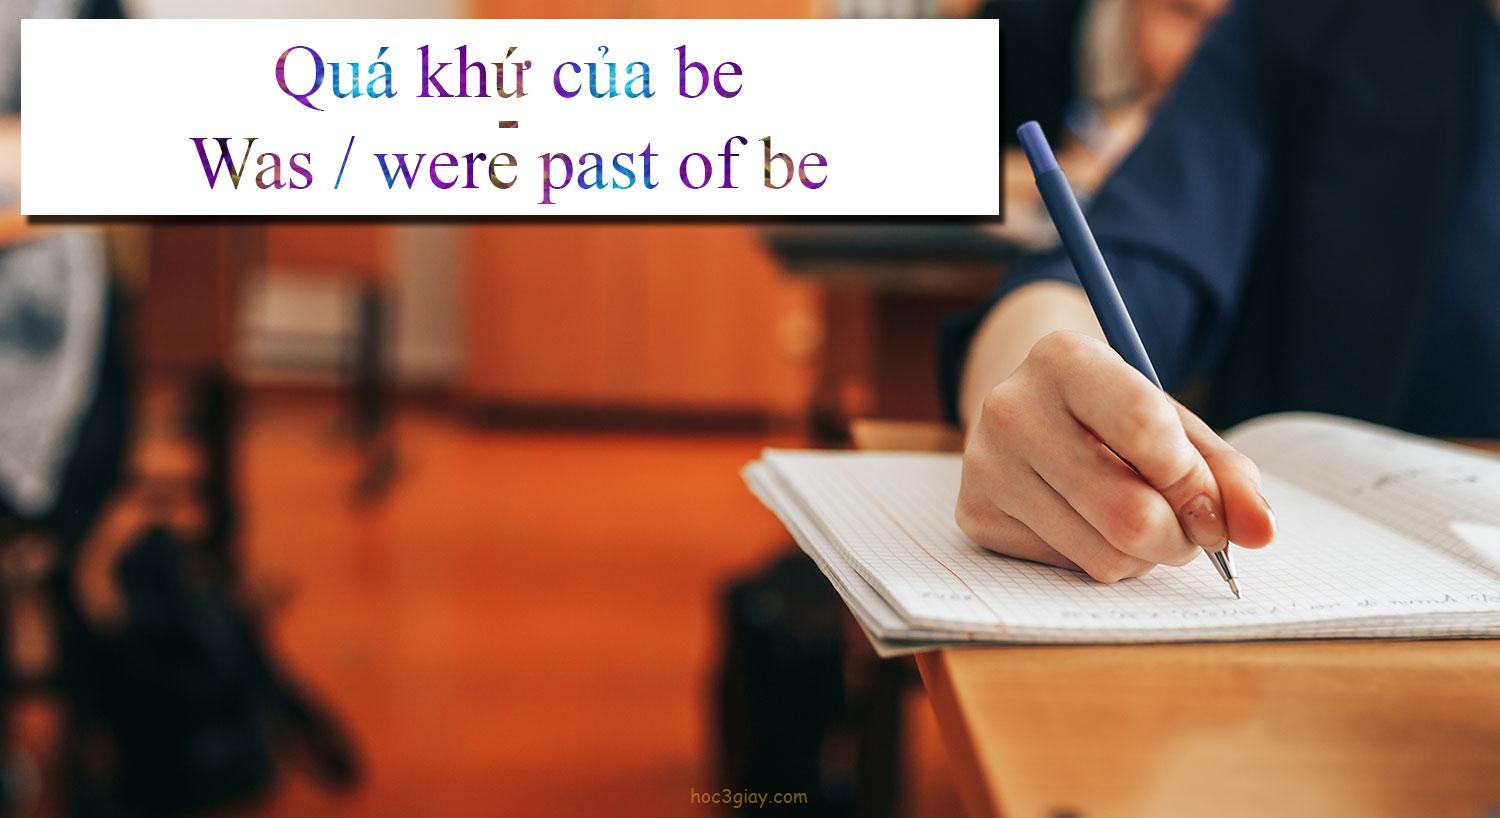 Quá khứ của be – Was / were past of be